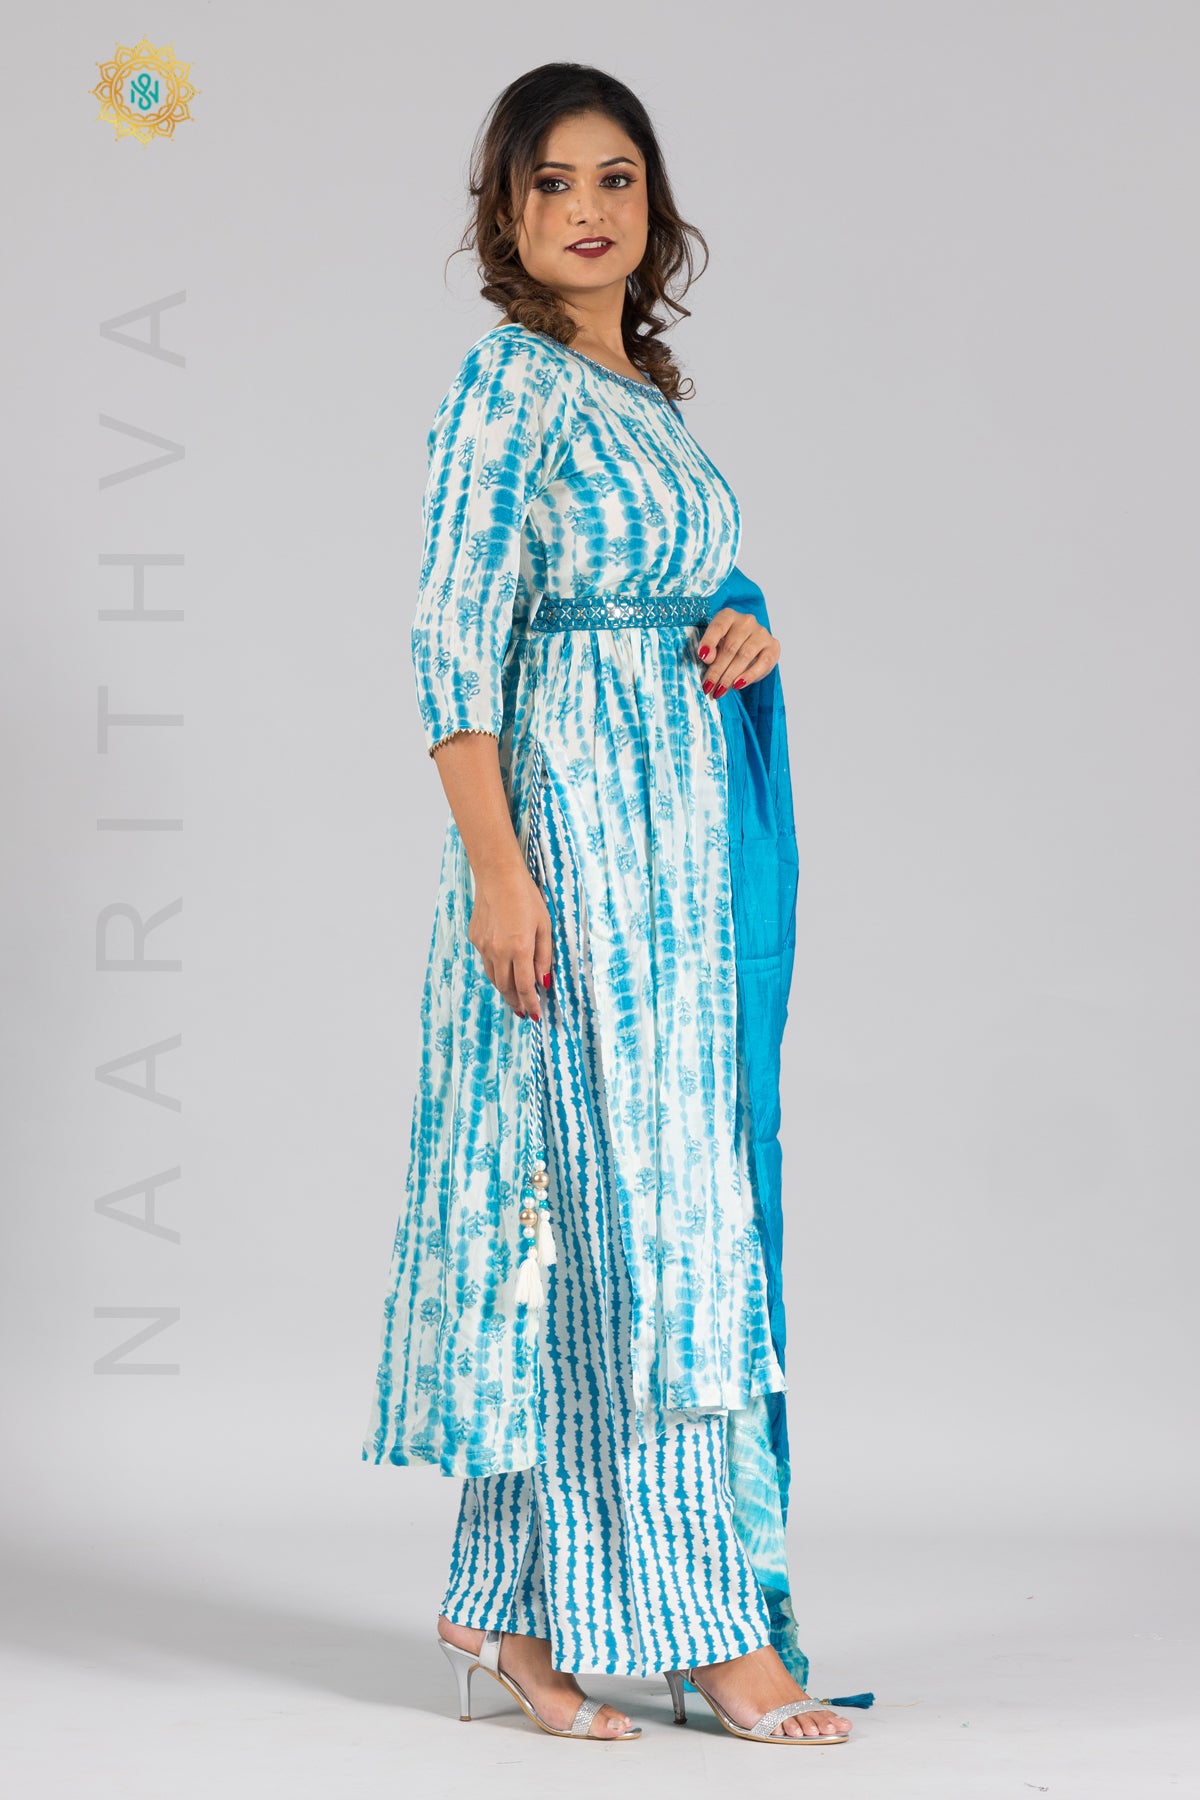 BLUE & WHITE - PARTY WEAR NAYRA CUT SALWAR SUIT WITH PARALLEL CUT PANT & DUPATTA